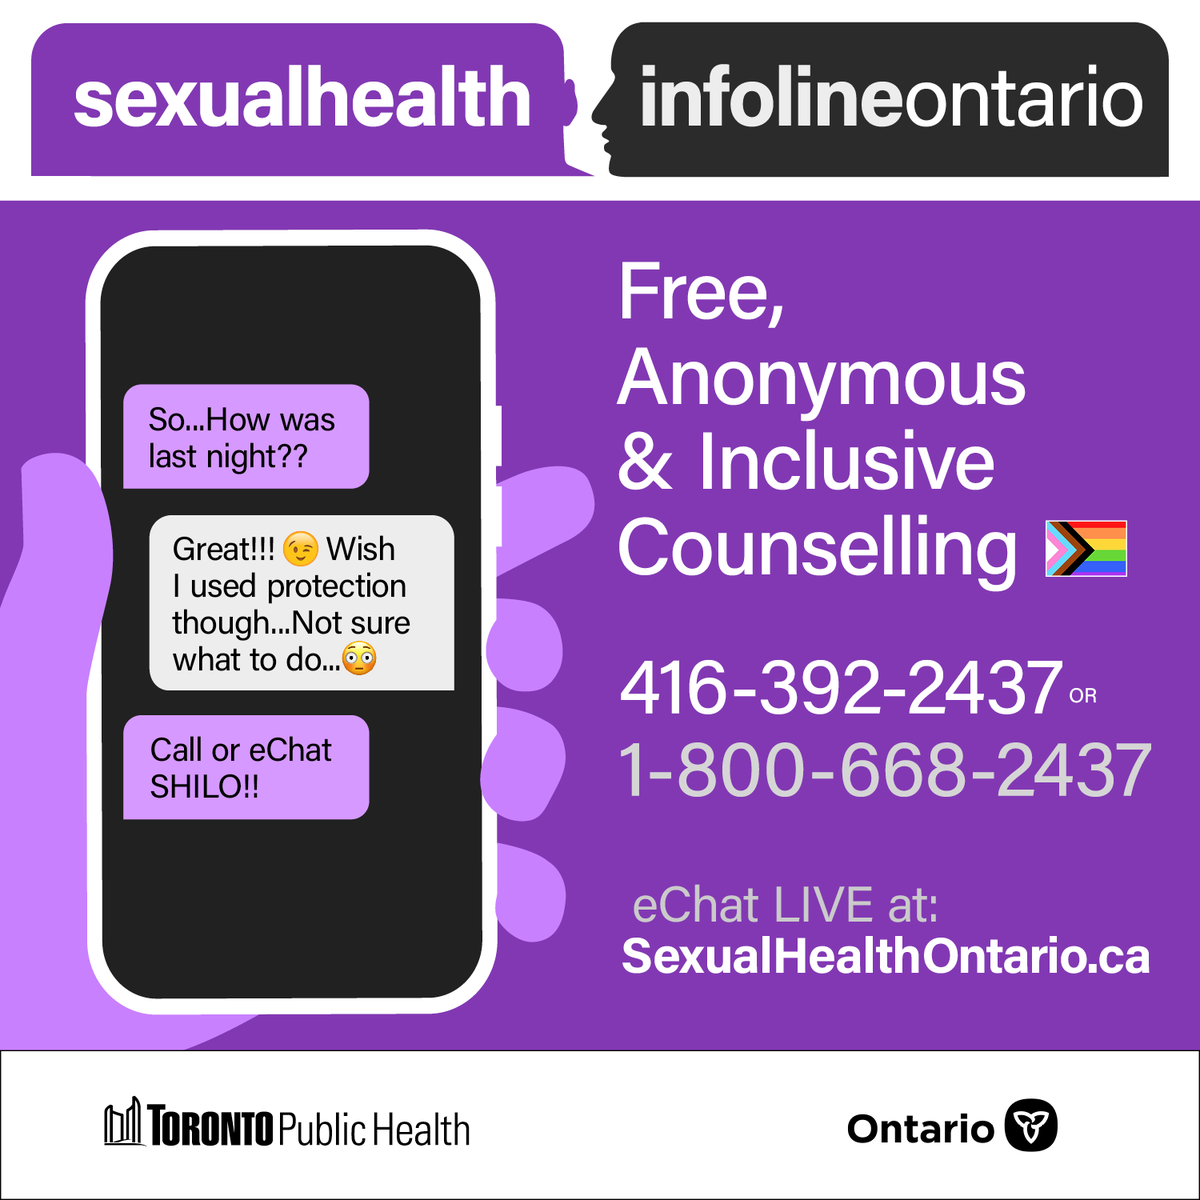 #SexualHealth stigma & discrimination can make it hard to seek information, support or referrals. SHILO is a free, anonymous & inclusive sexual health counselling service for everyone in Ontario. Call 416-392-2437 (TTY 1-800-668-2437) or eChat at SexualHealthOntario.ca